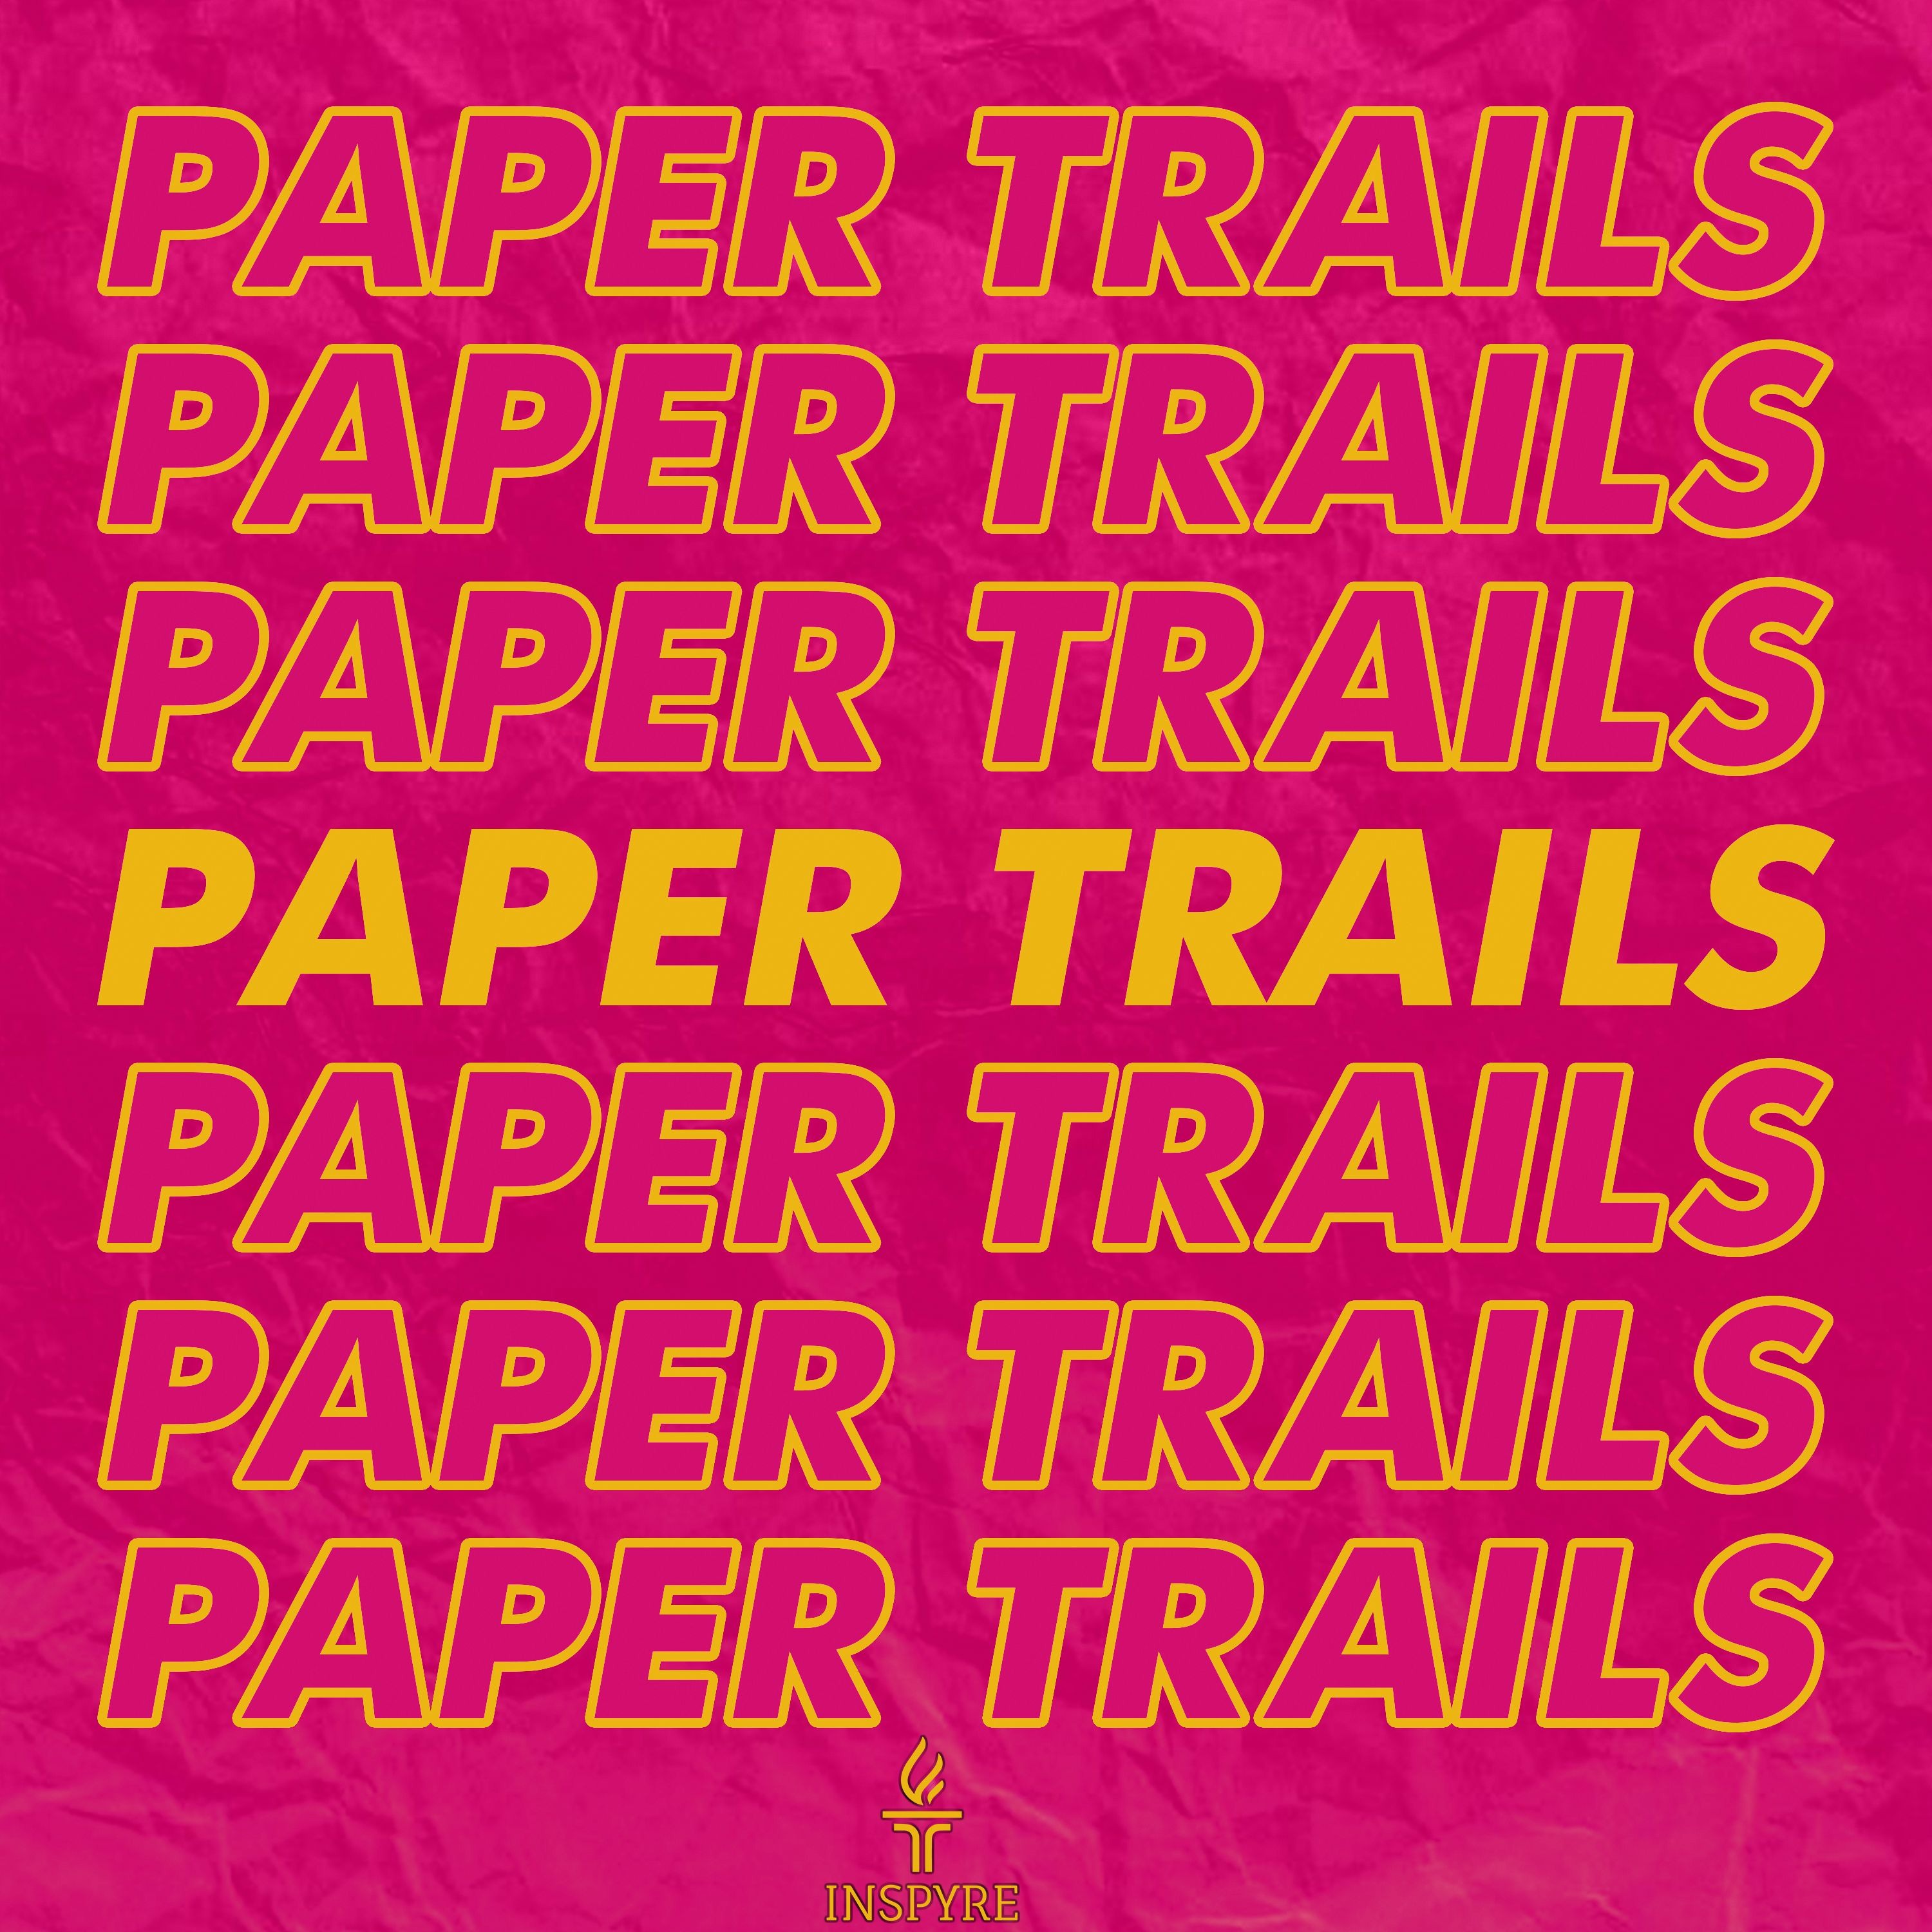 Paper Trails S2 Ep 2 Ft. Book of Zu - Creative dreams and nightmares